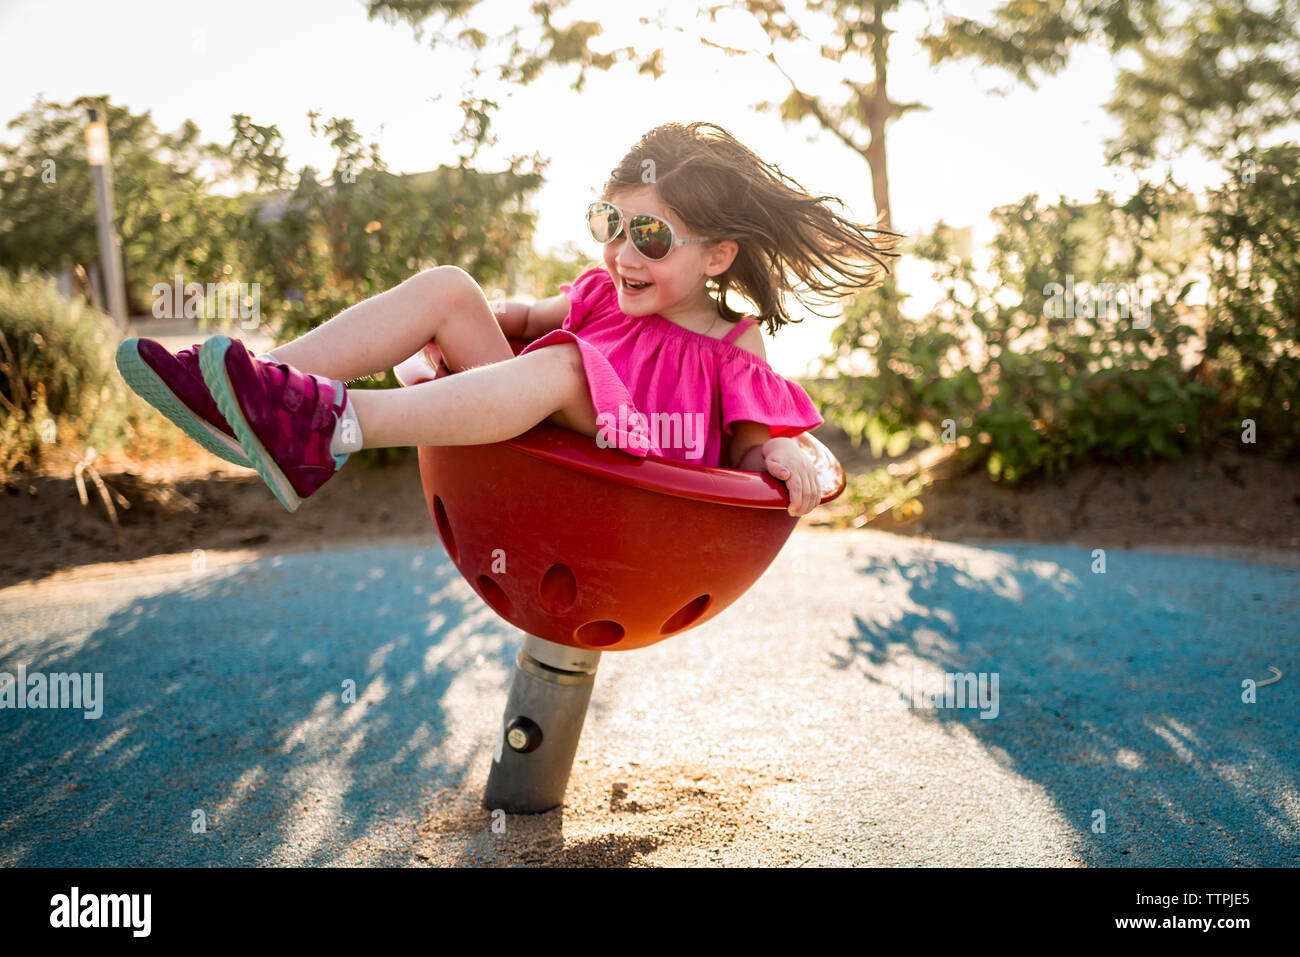 Happy girl playing on spring ride at playground Stock Photo